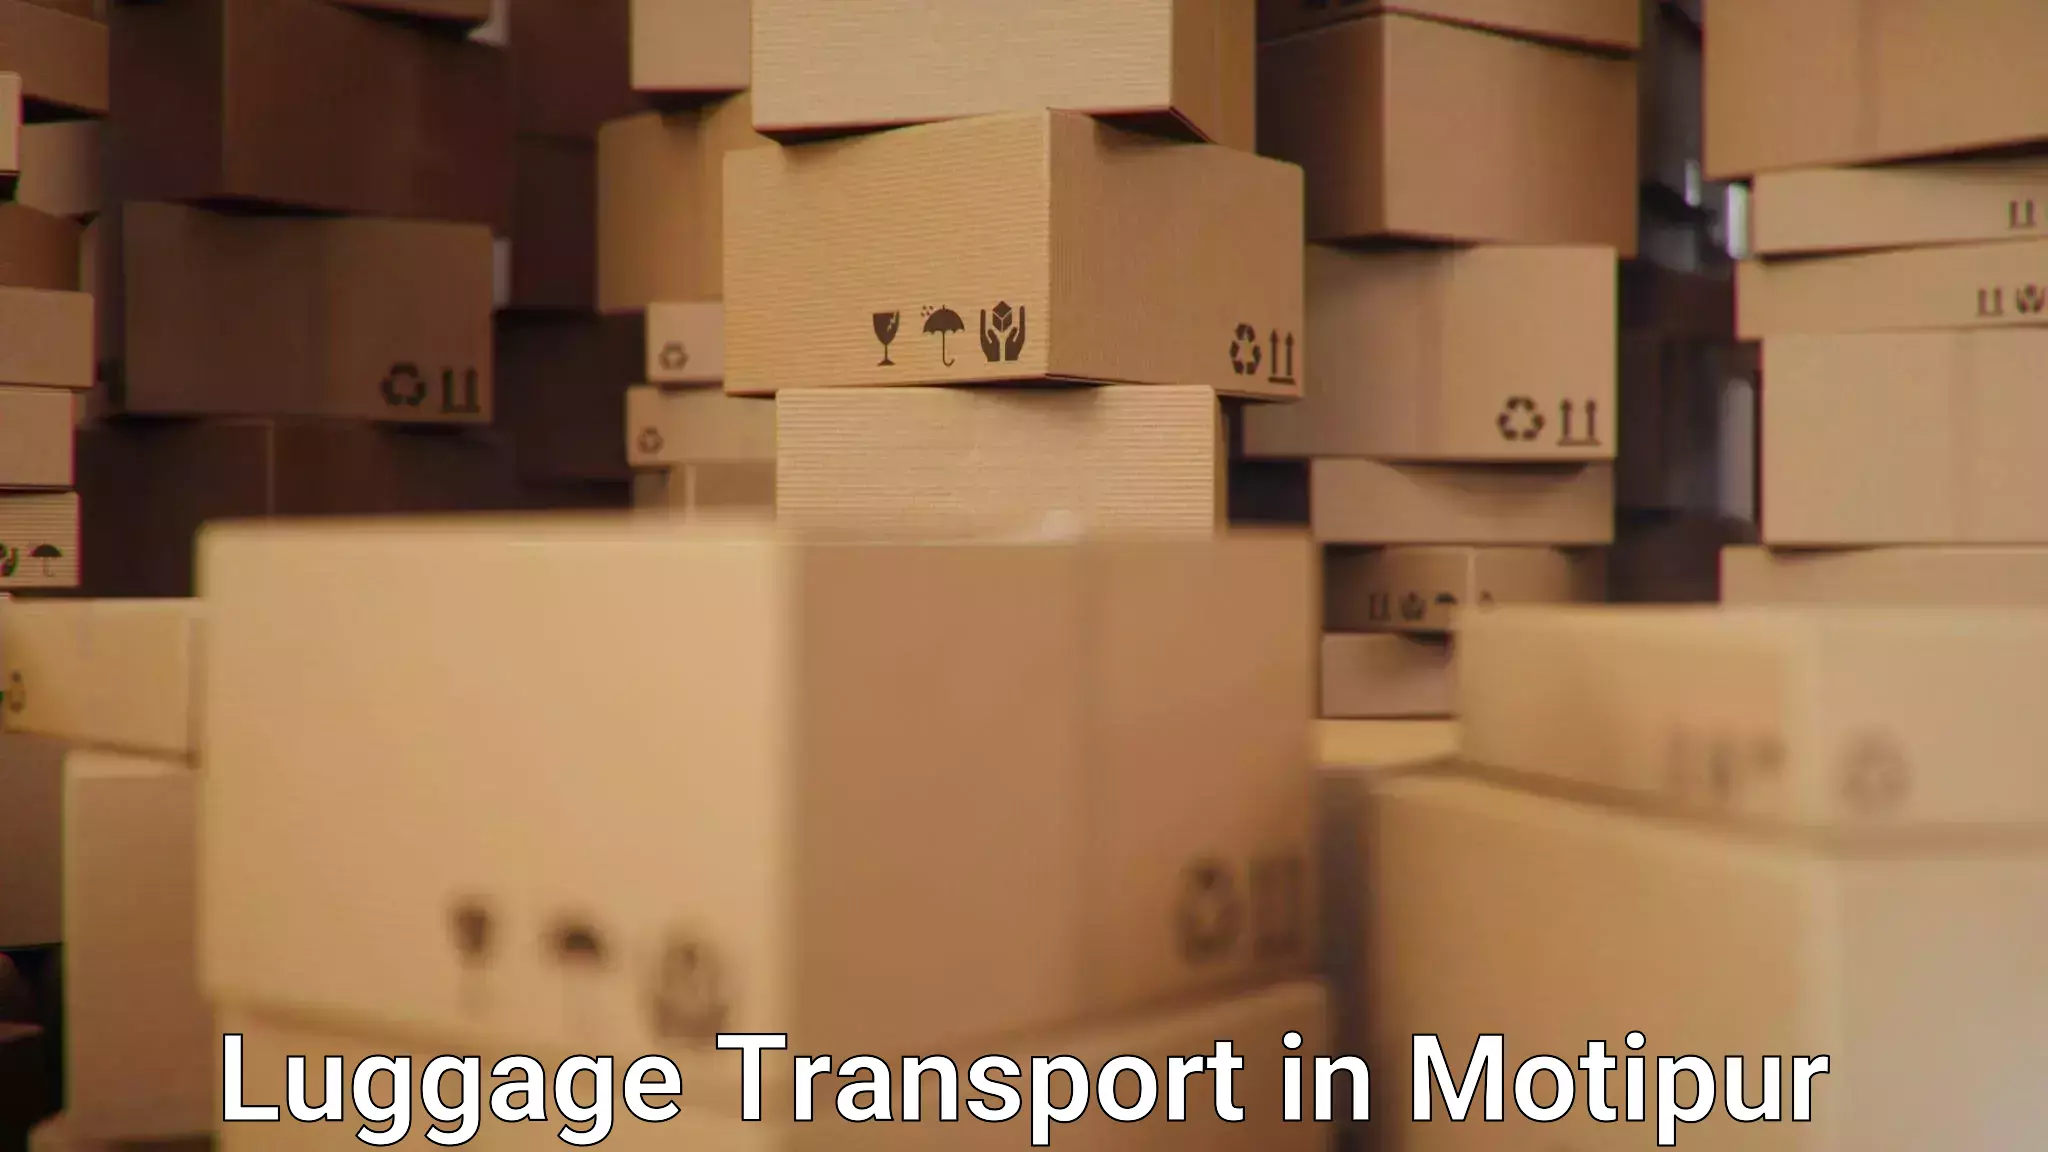 Luggage transport consultancy in Motipur